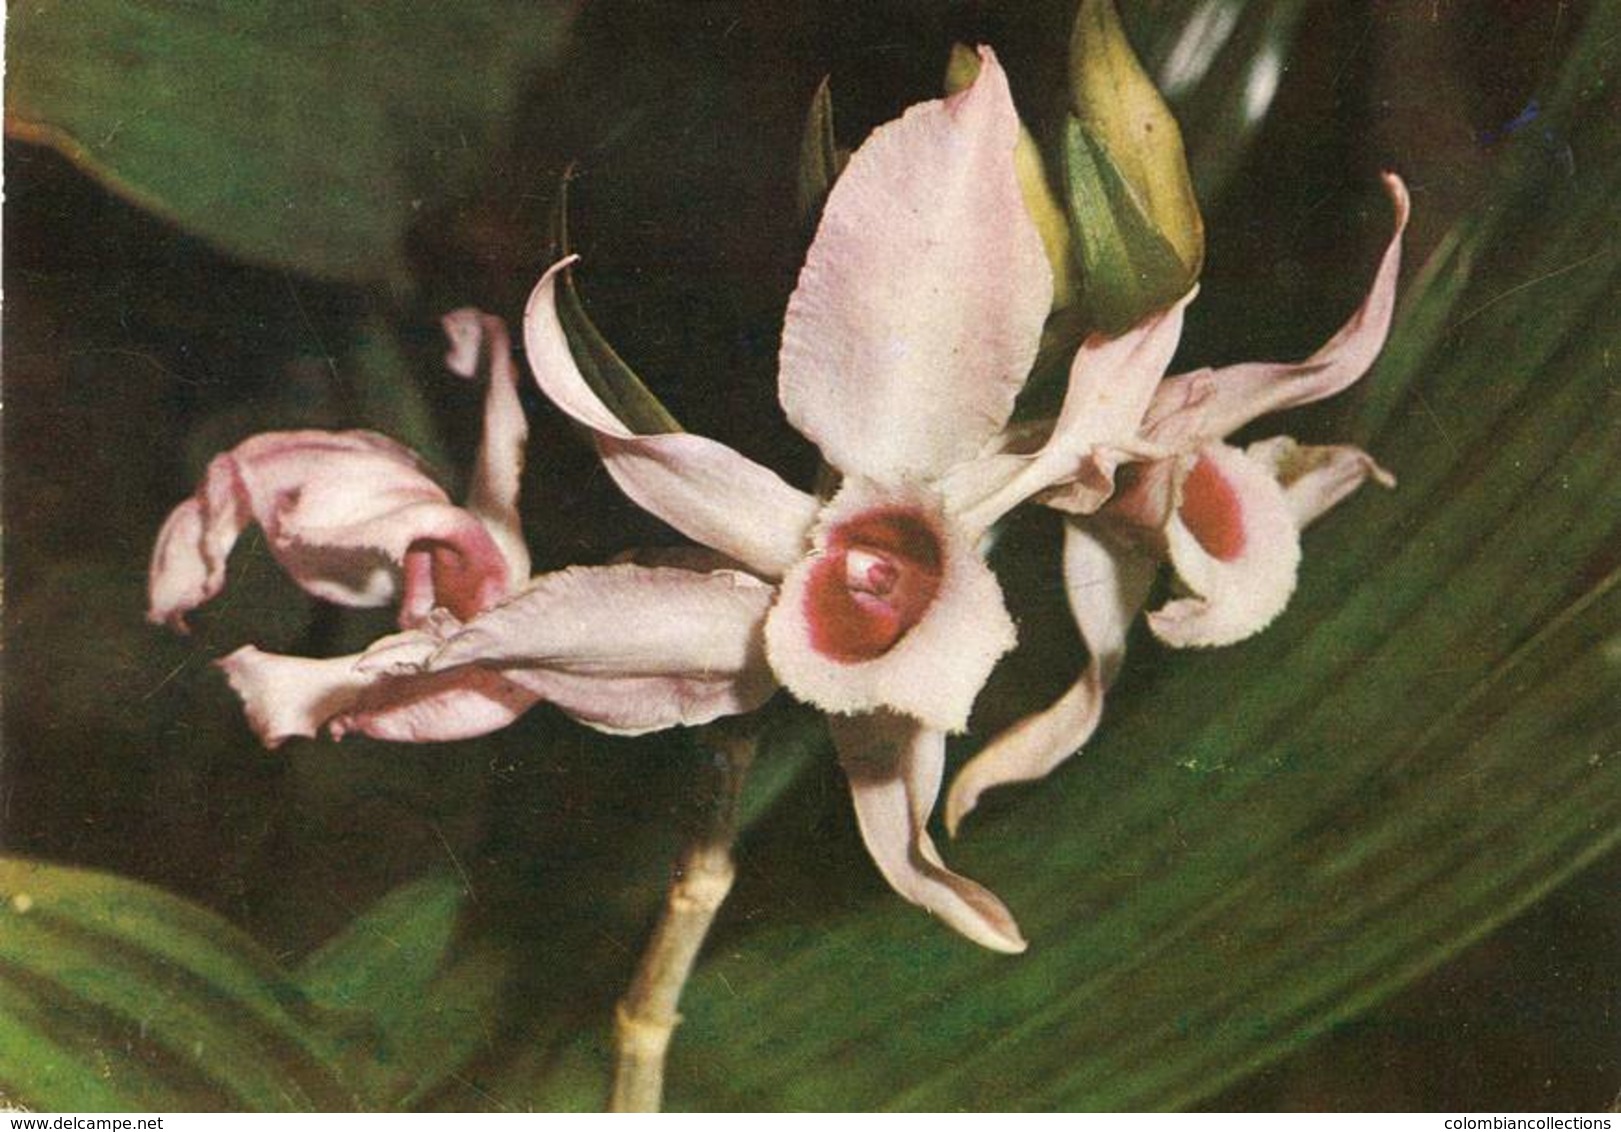 Lote PEP1093, Colombia,  Postal, Postcard, Orchid, Not Perfect Card, Orquidea, Dendrobium Mobile, 10016 - Colombia